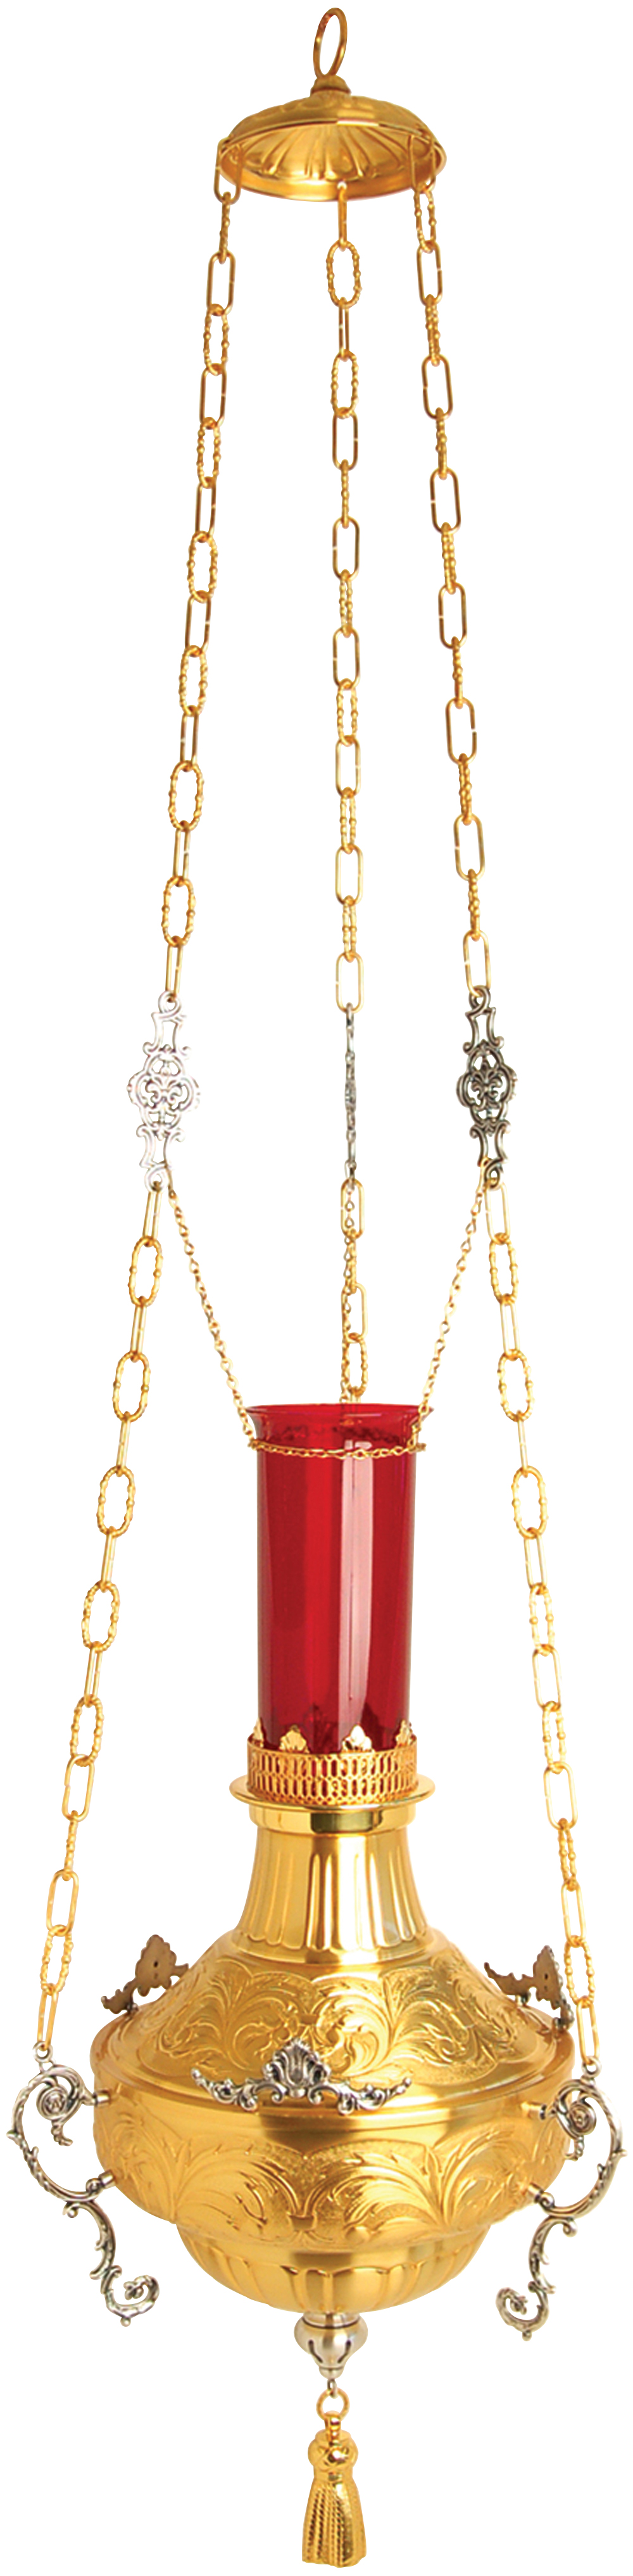 Sanctuary Lamp Hanging 60 inch 24k Gold Plate